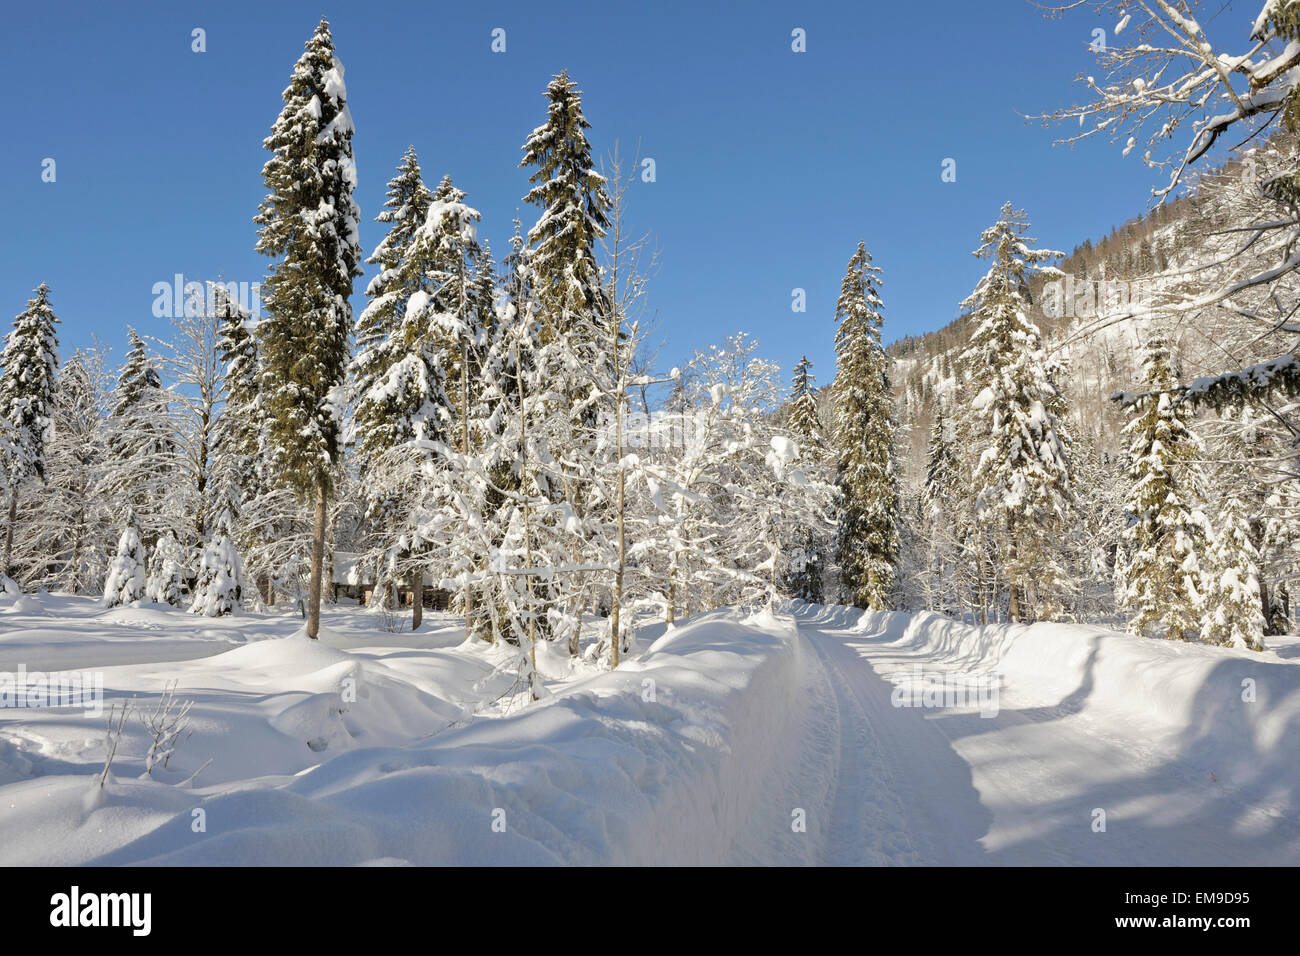 Landcape covered in deep snow near Wildbad Kreuth, Bavarian alps, Germany Stock Photo